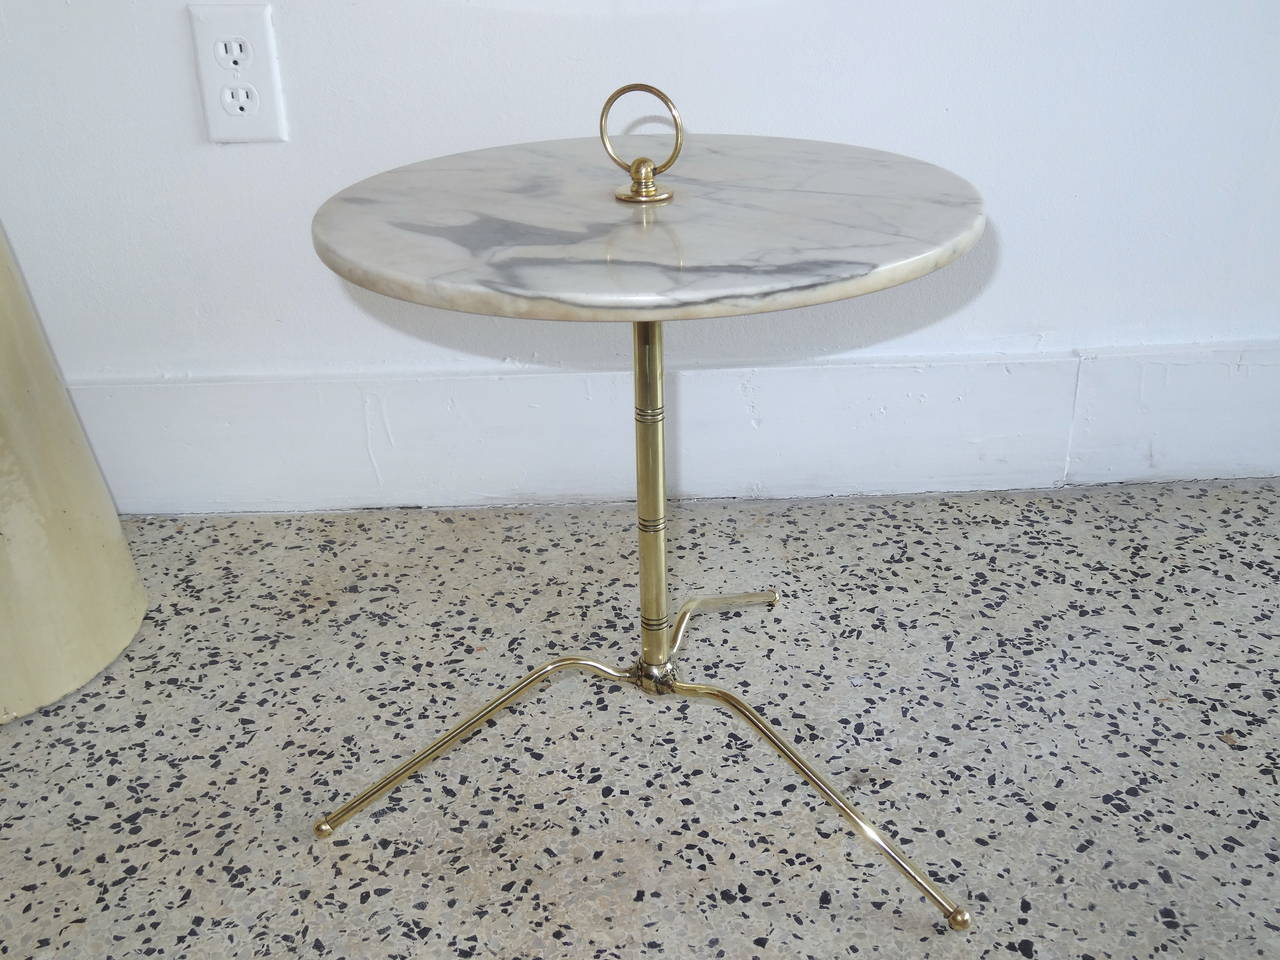 Beautiful Mid-Century brass side table with marble top. The design of the tripod leg is most interesting with a spider like form. Beautifully detailed and finished.
Gio Ponti in design and era.